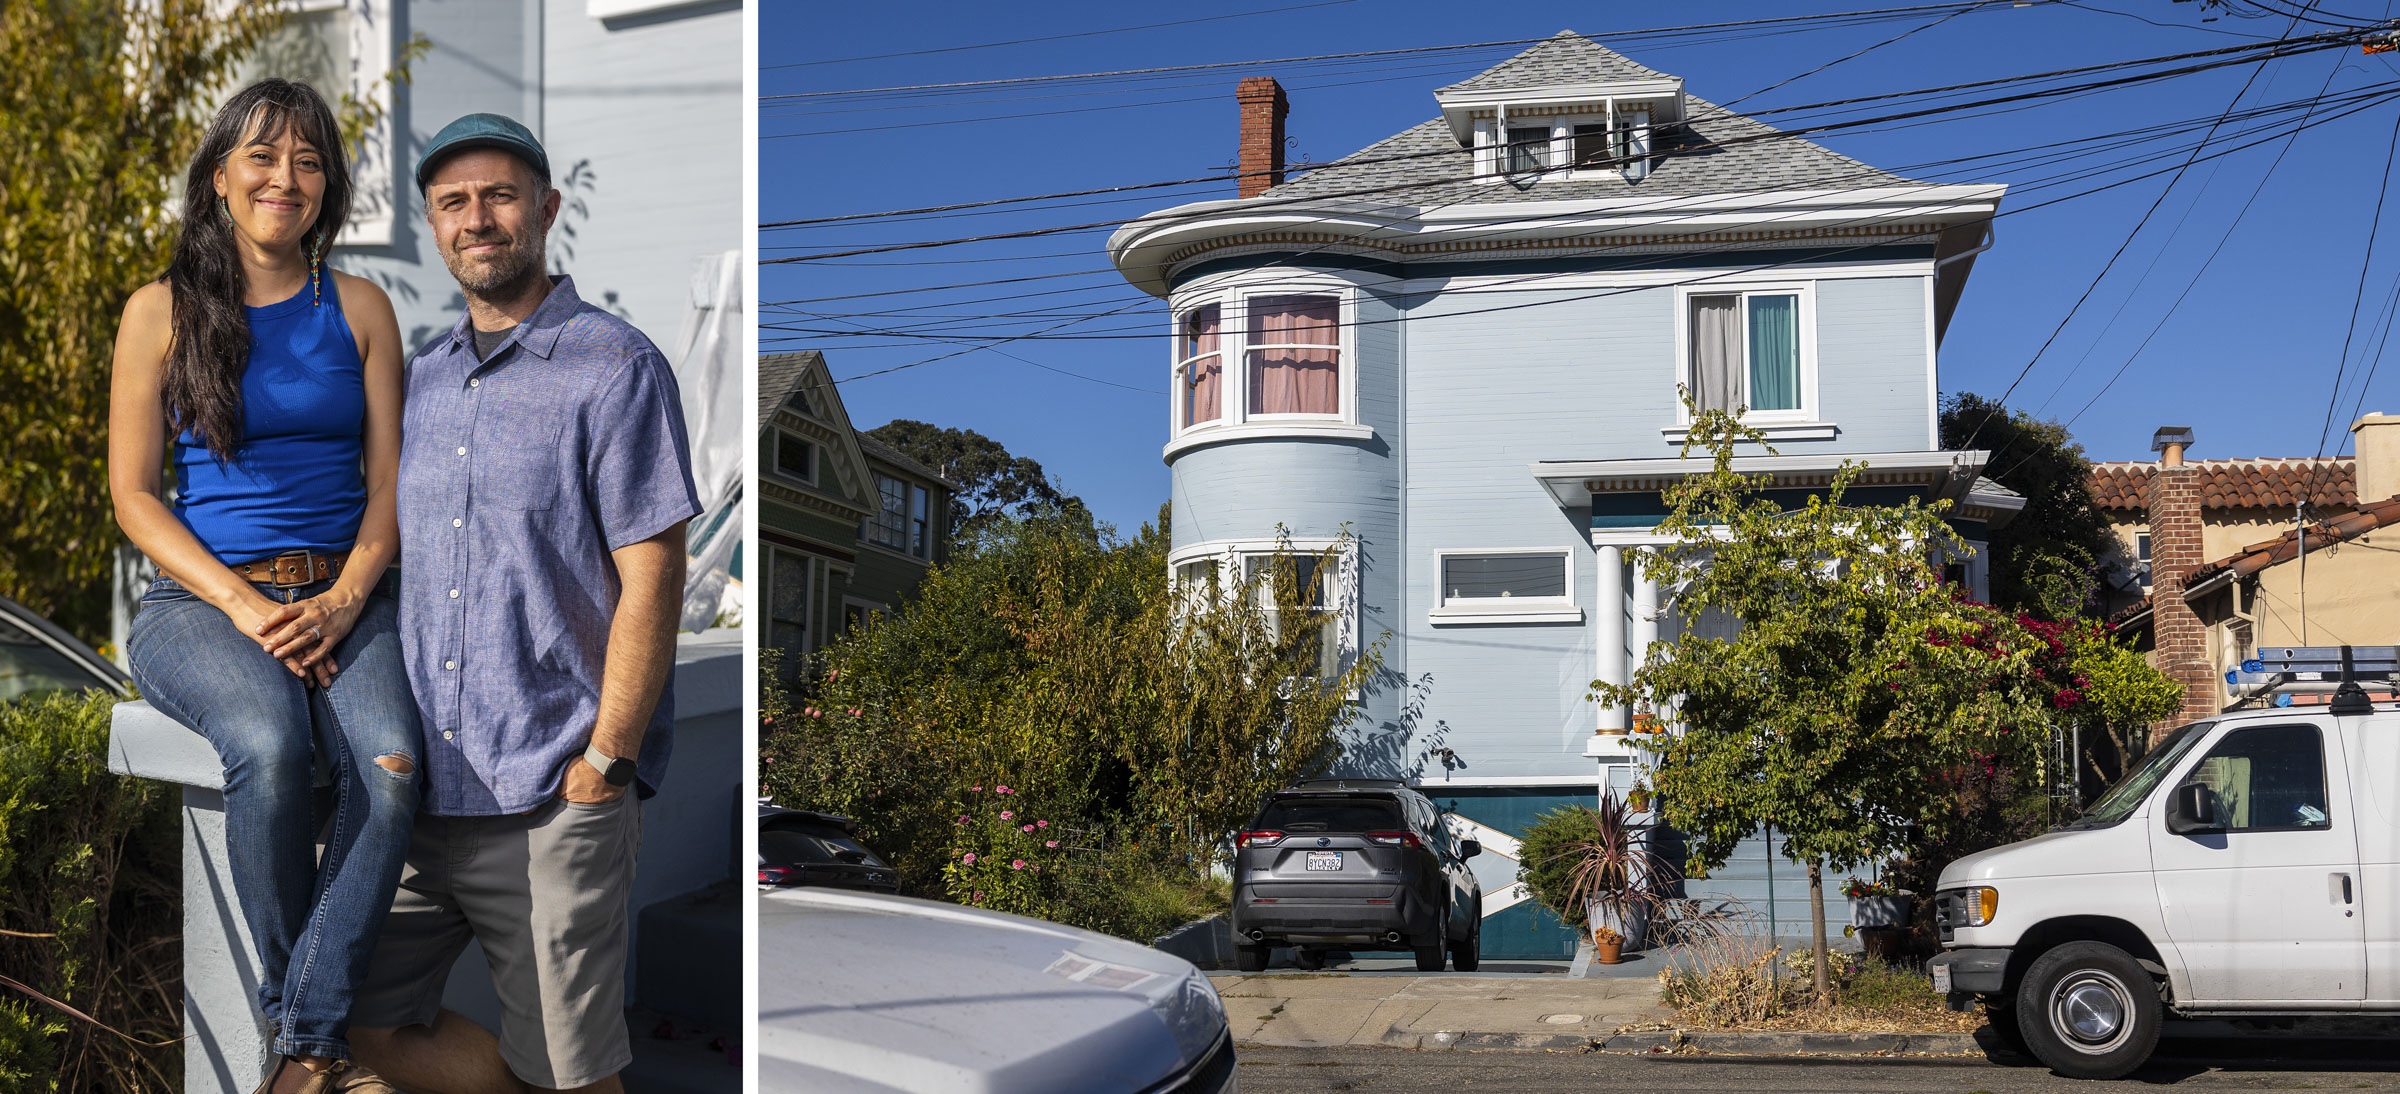 Two photos side by side: one of two people and one of a blue house.